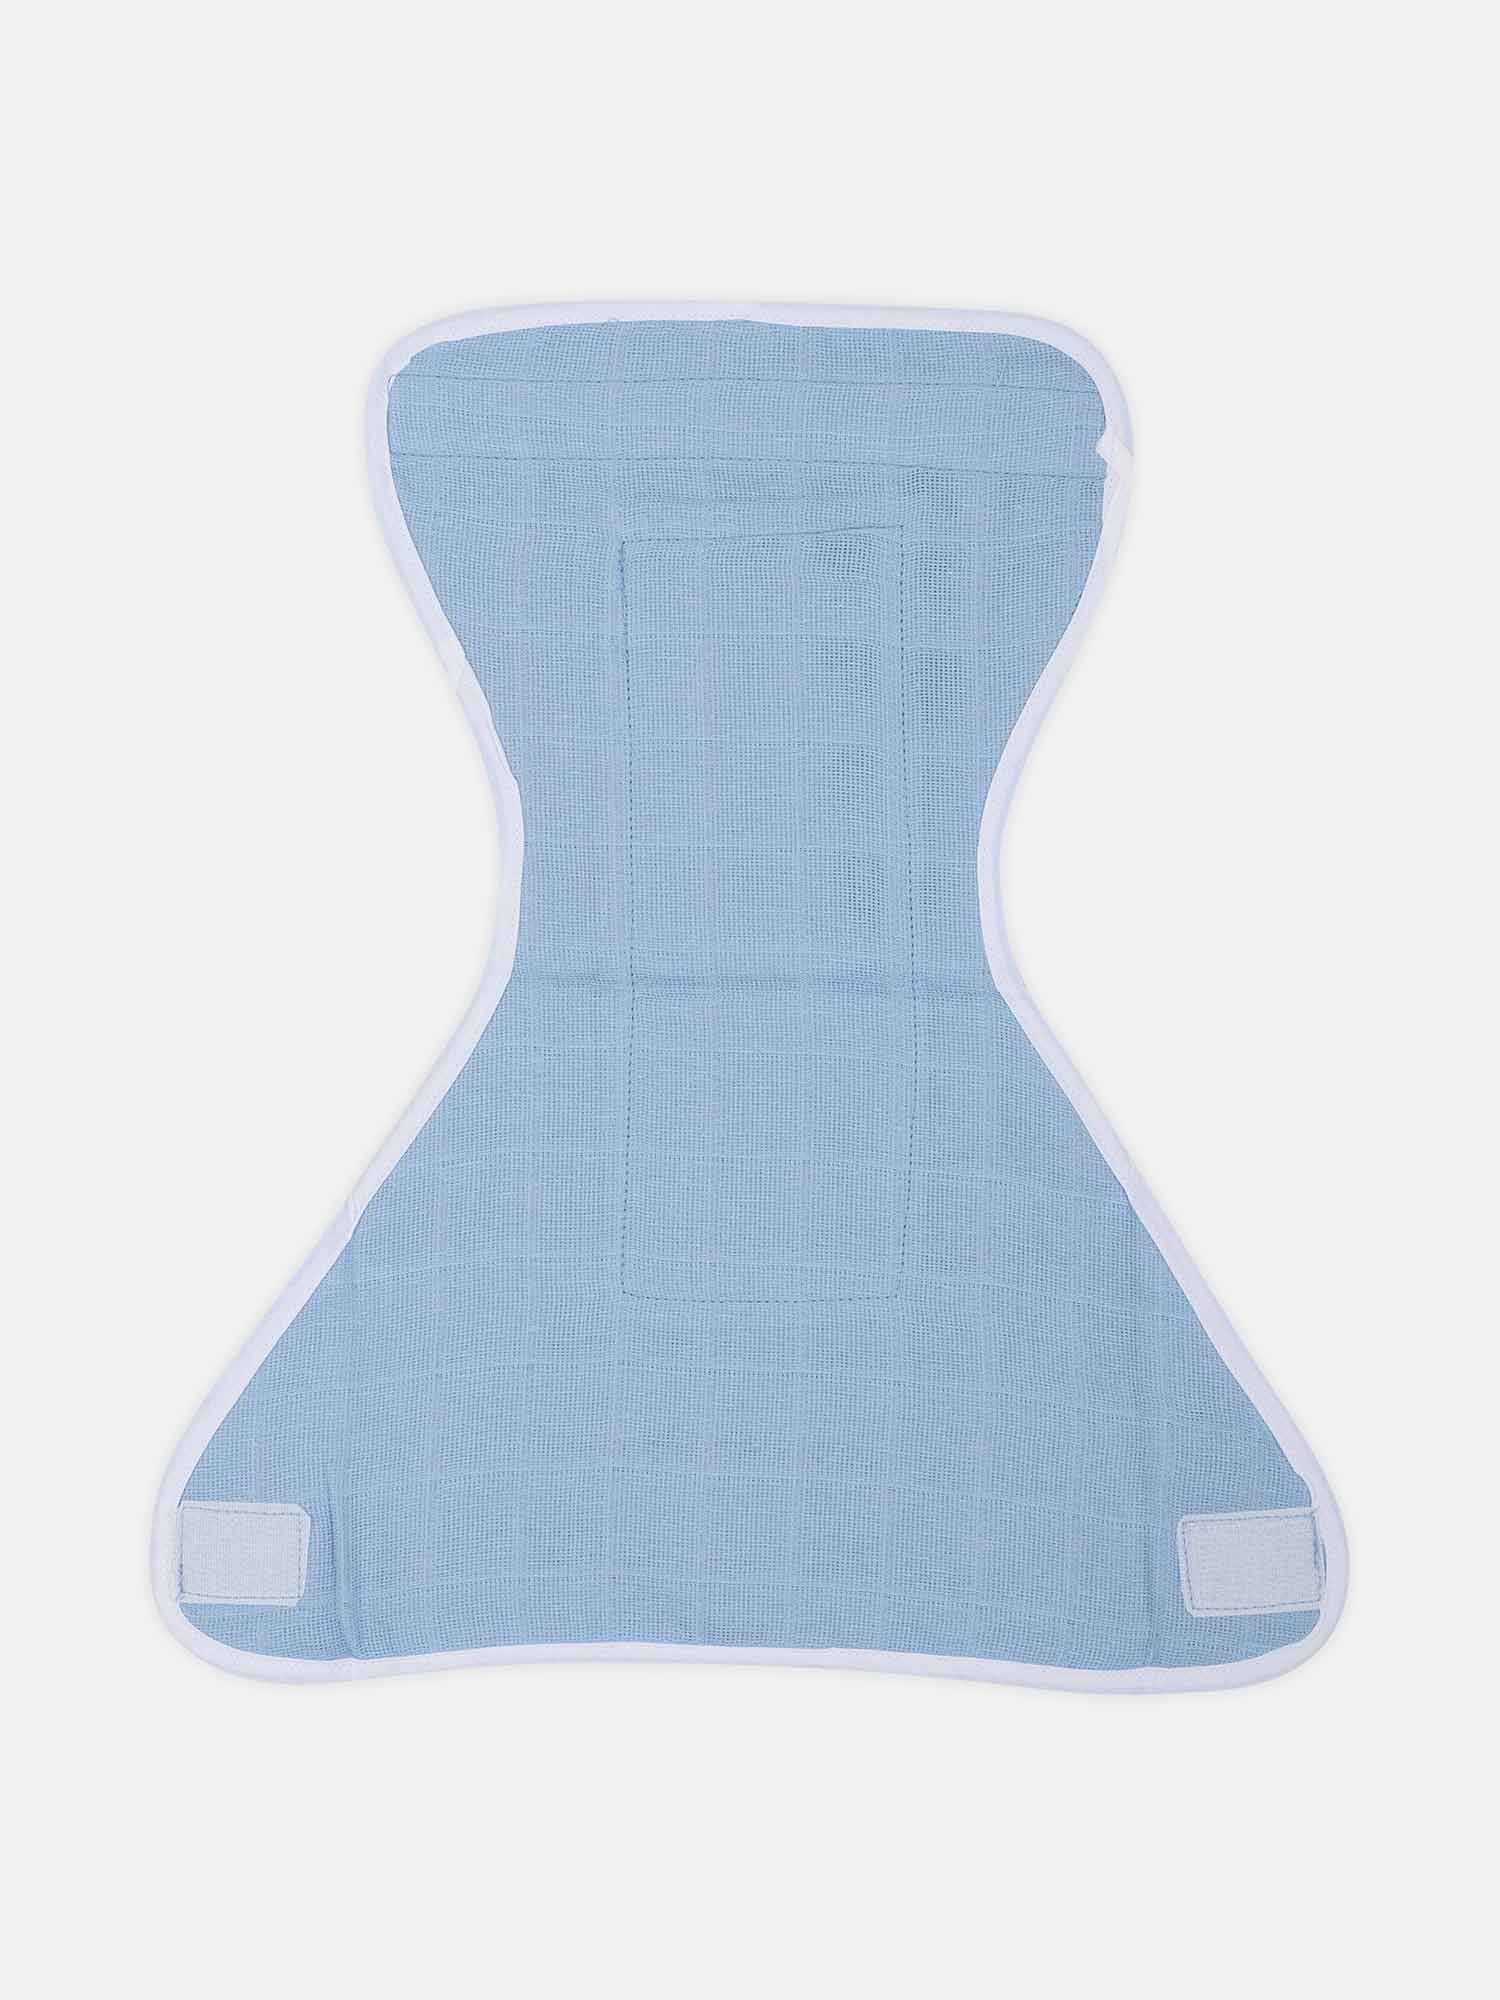 Oh Baby Plain Velcro Nappies Blue - Ltpl